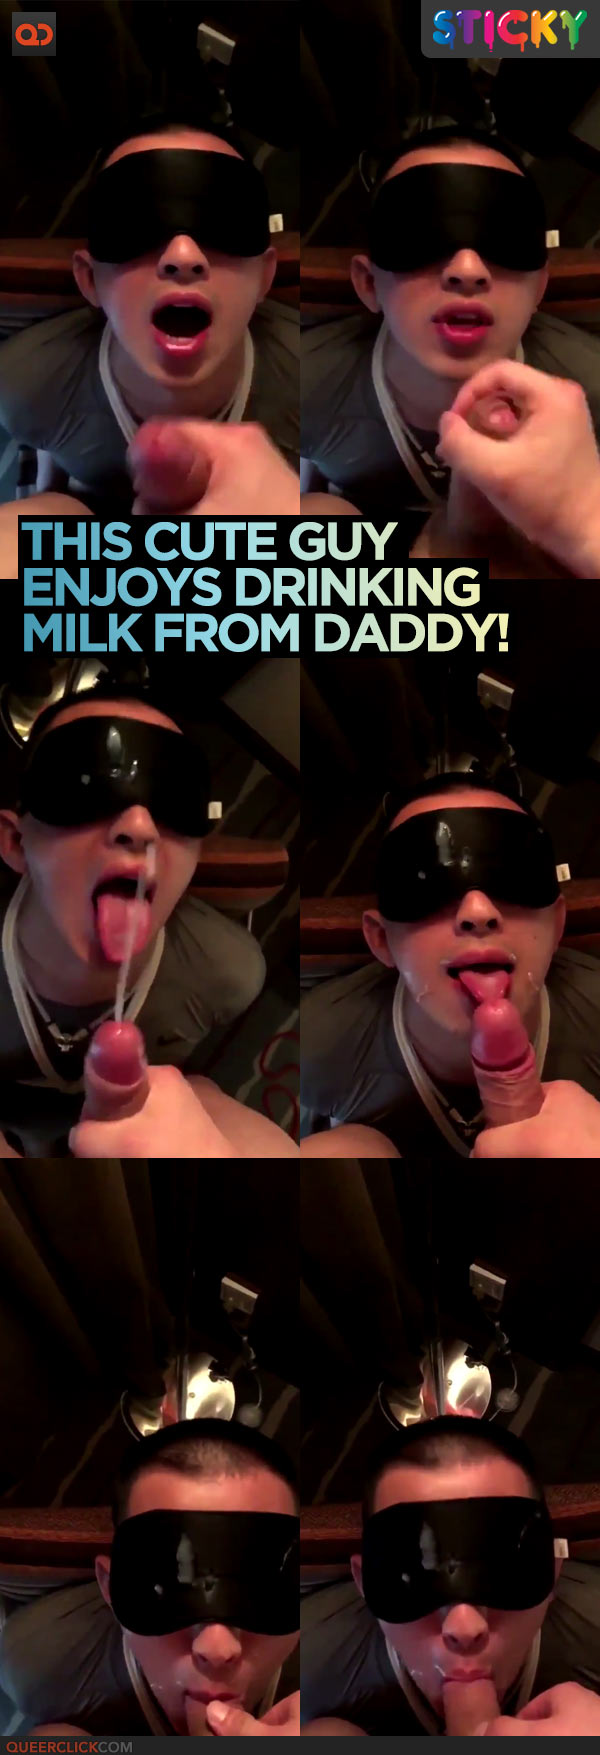 This Cute Guy Enjoys Drinking Milk From Daddy!